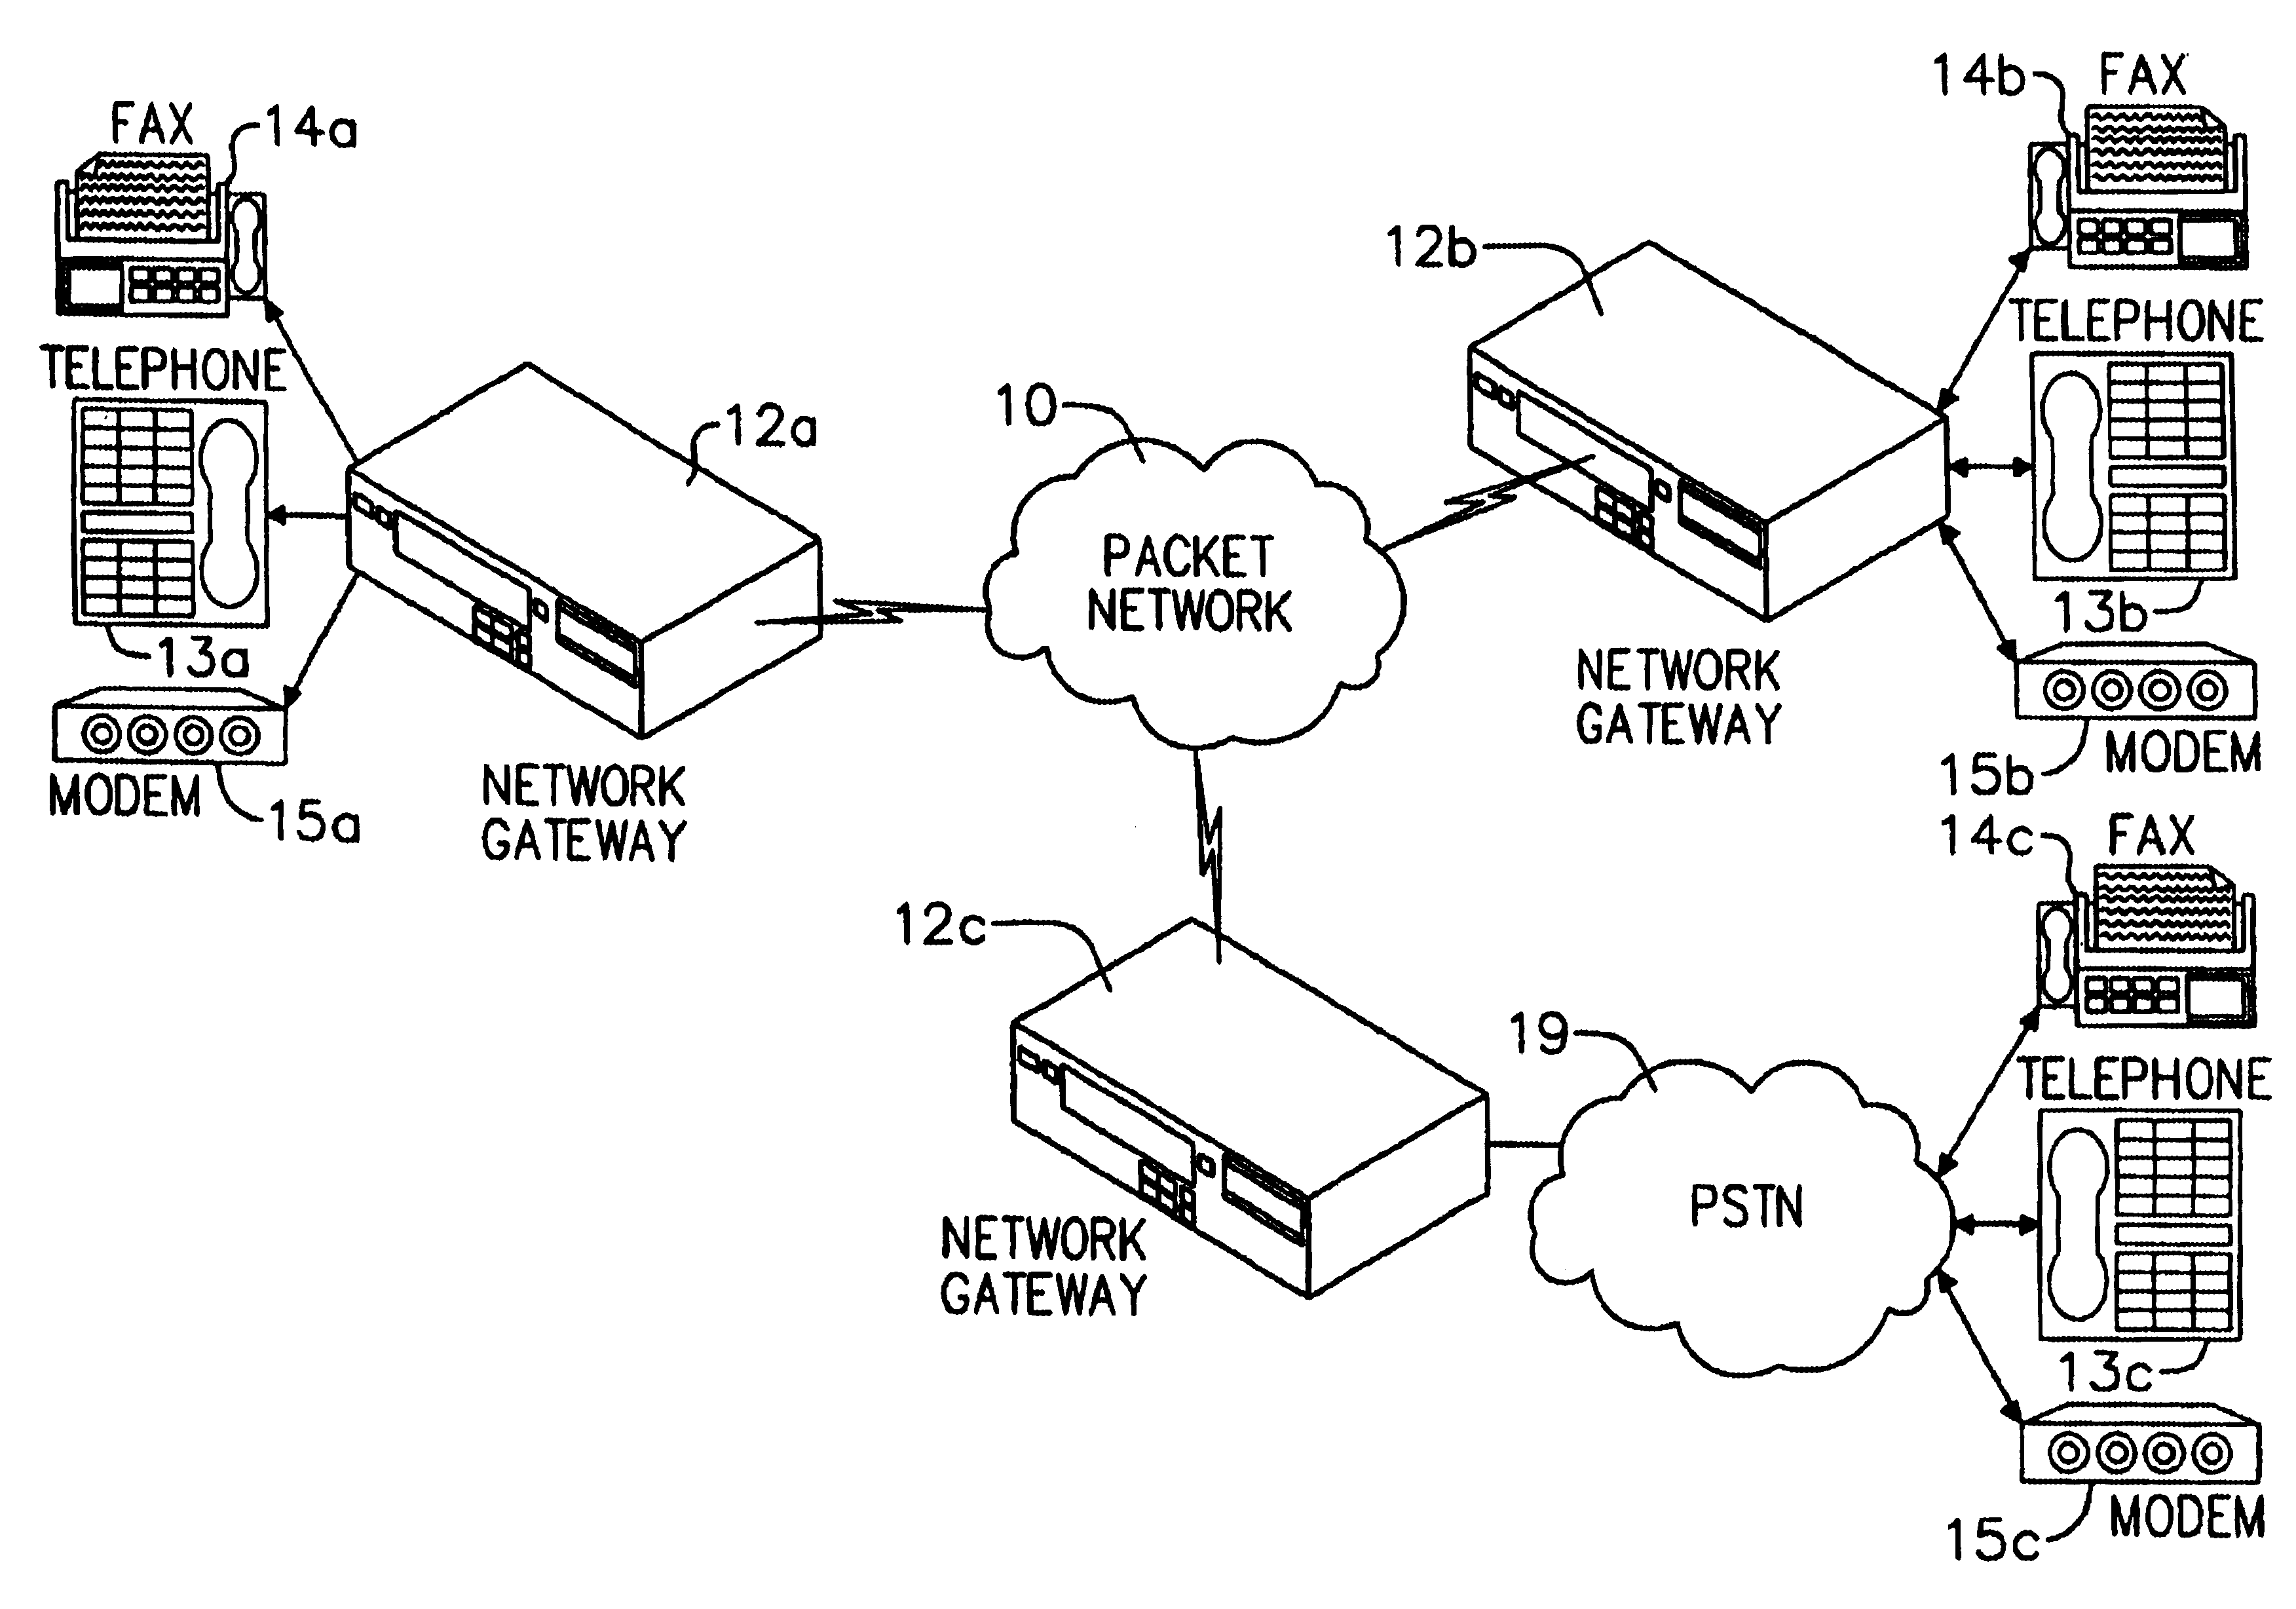 Packet based network exchange with rate synchronization